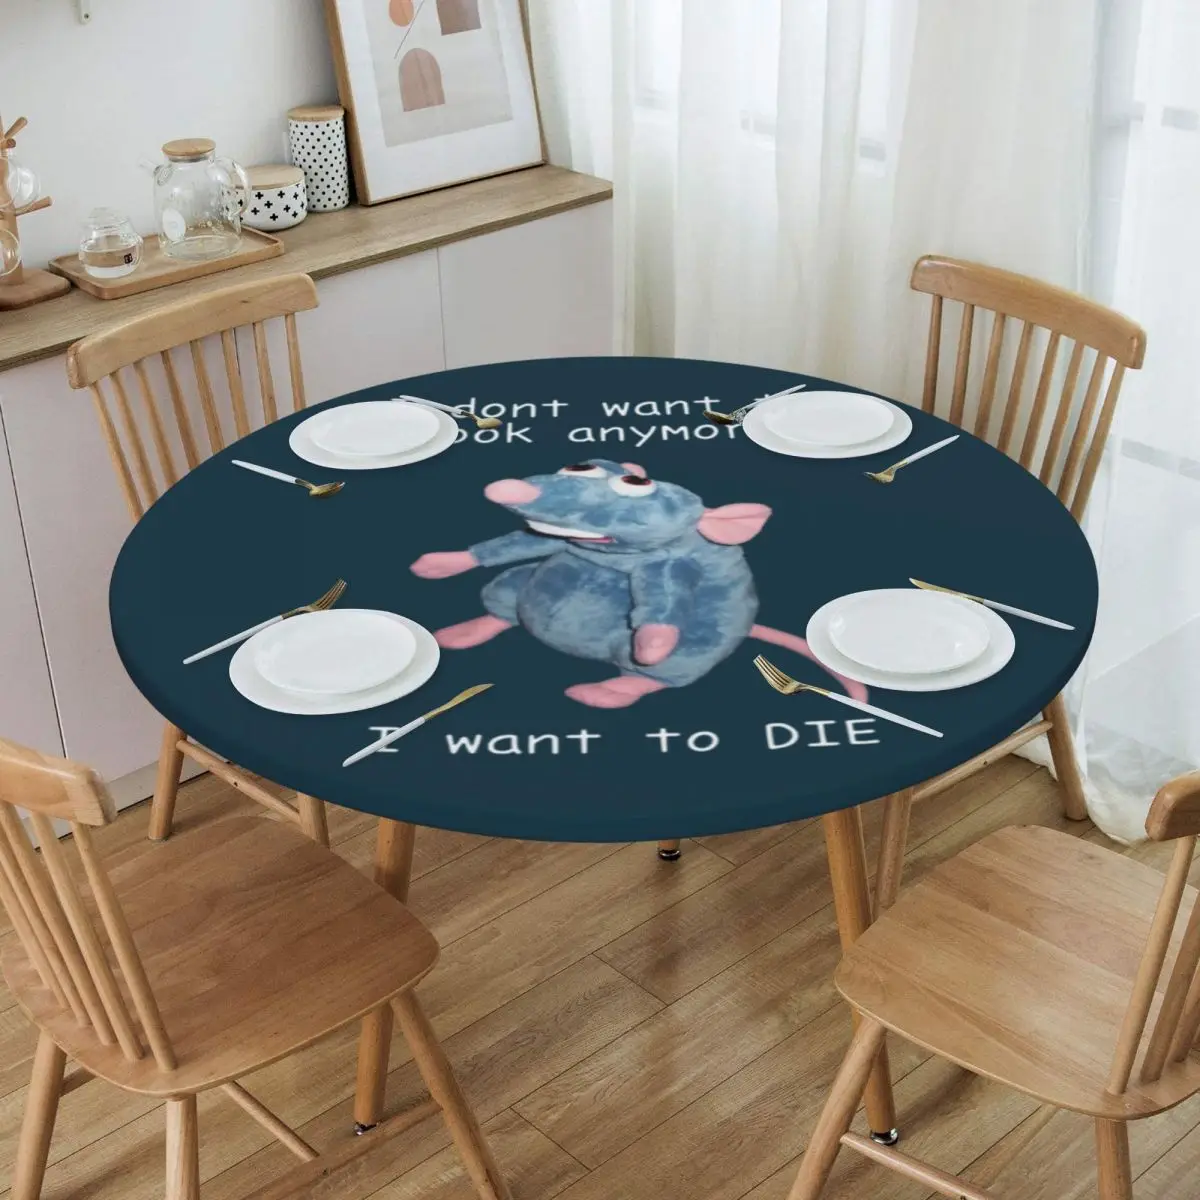 

Round Waterproof Oil-Proof I Don't Want To Cook Anymore I Want To Die Tablecloth Backed Elastic Edge Table Cover Table Cloth